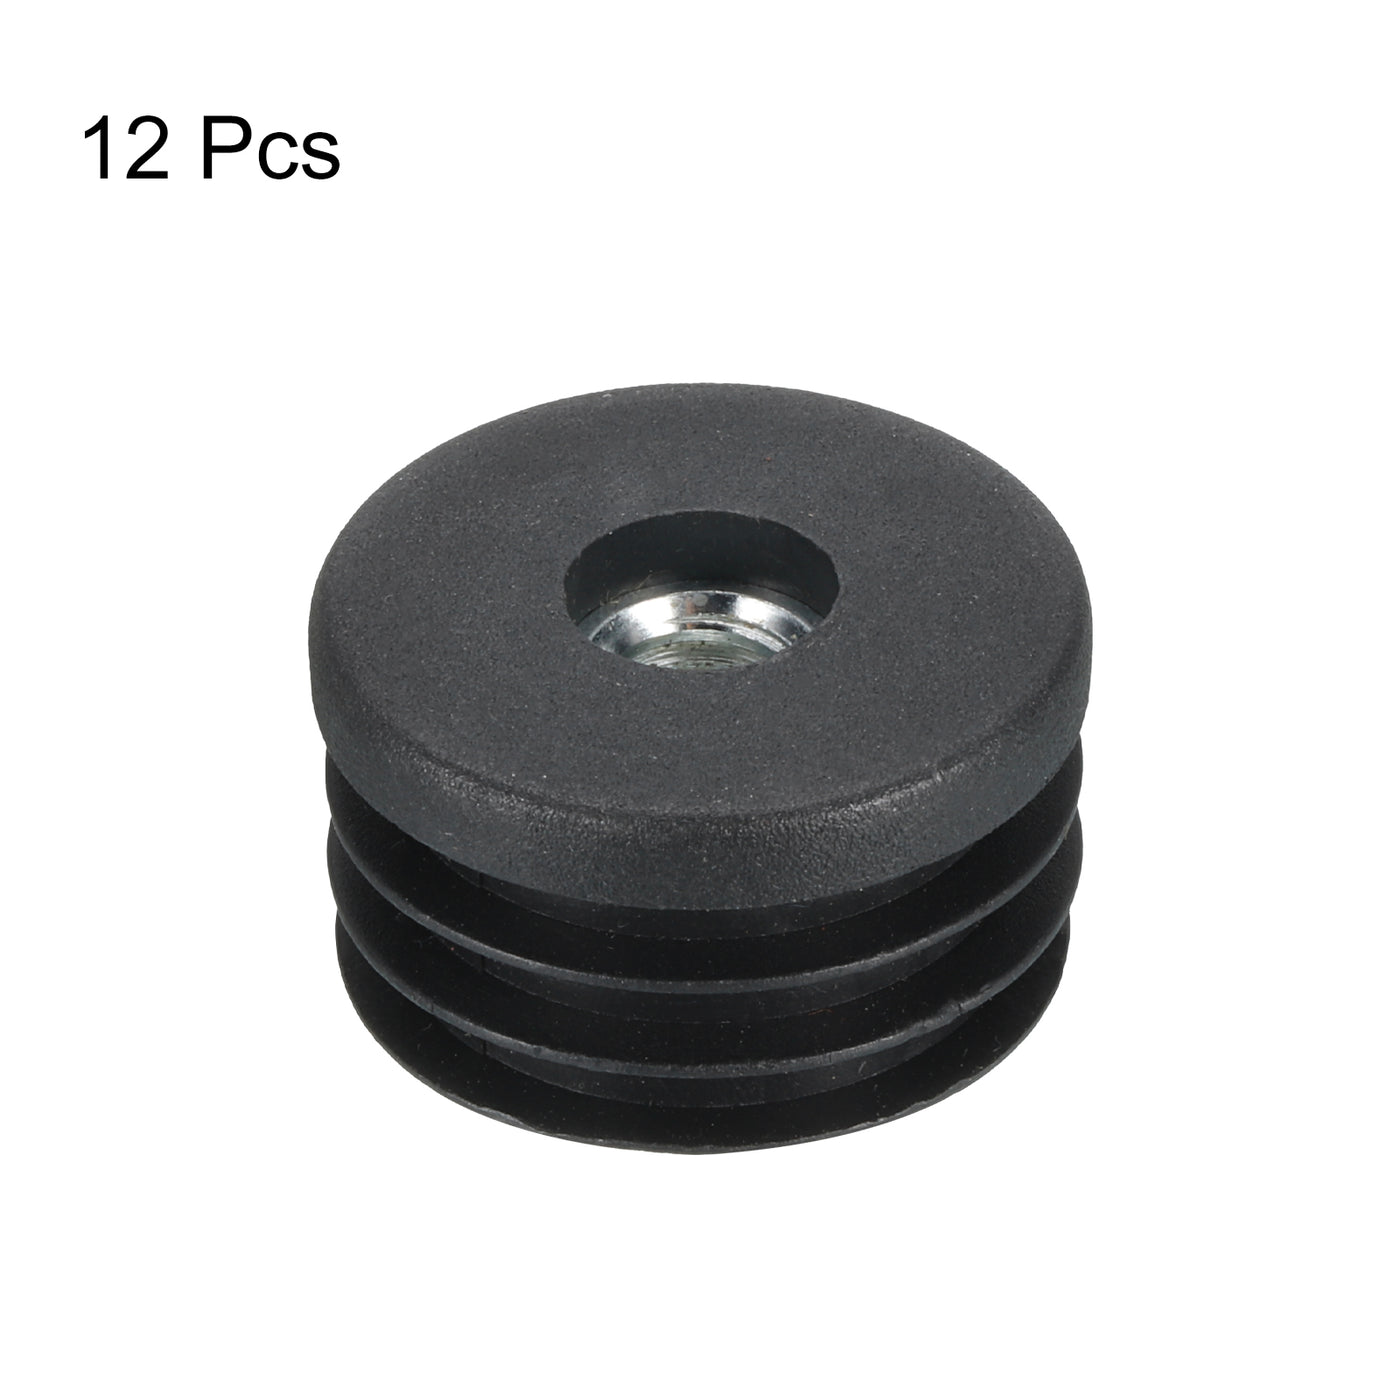 uxcell Uxcell 8Pcs Caster Insert with Thread, 30mm/1.18" M8 Thread for Furniture